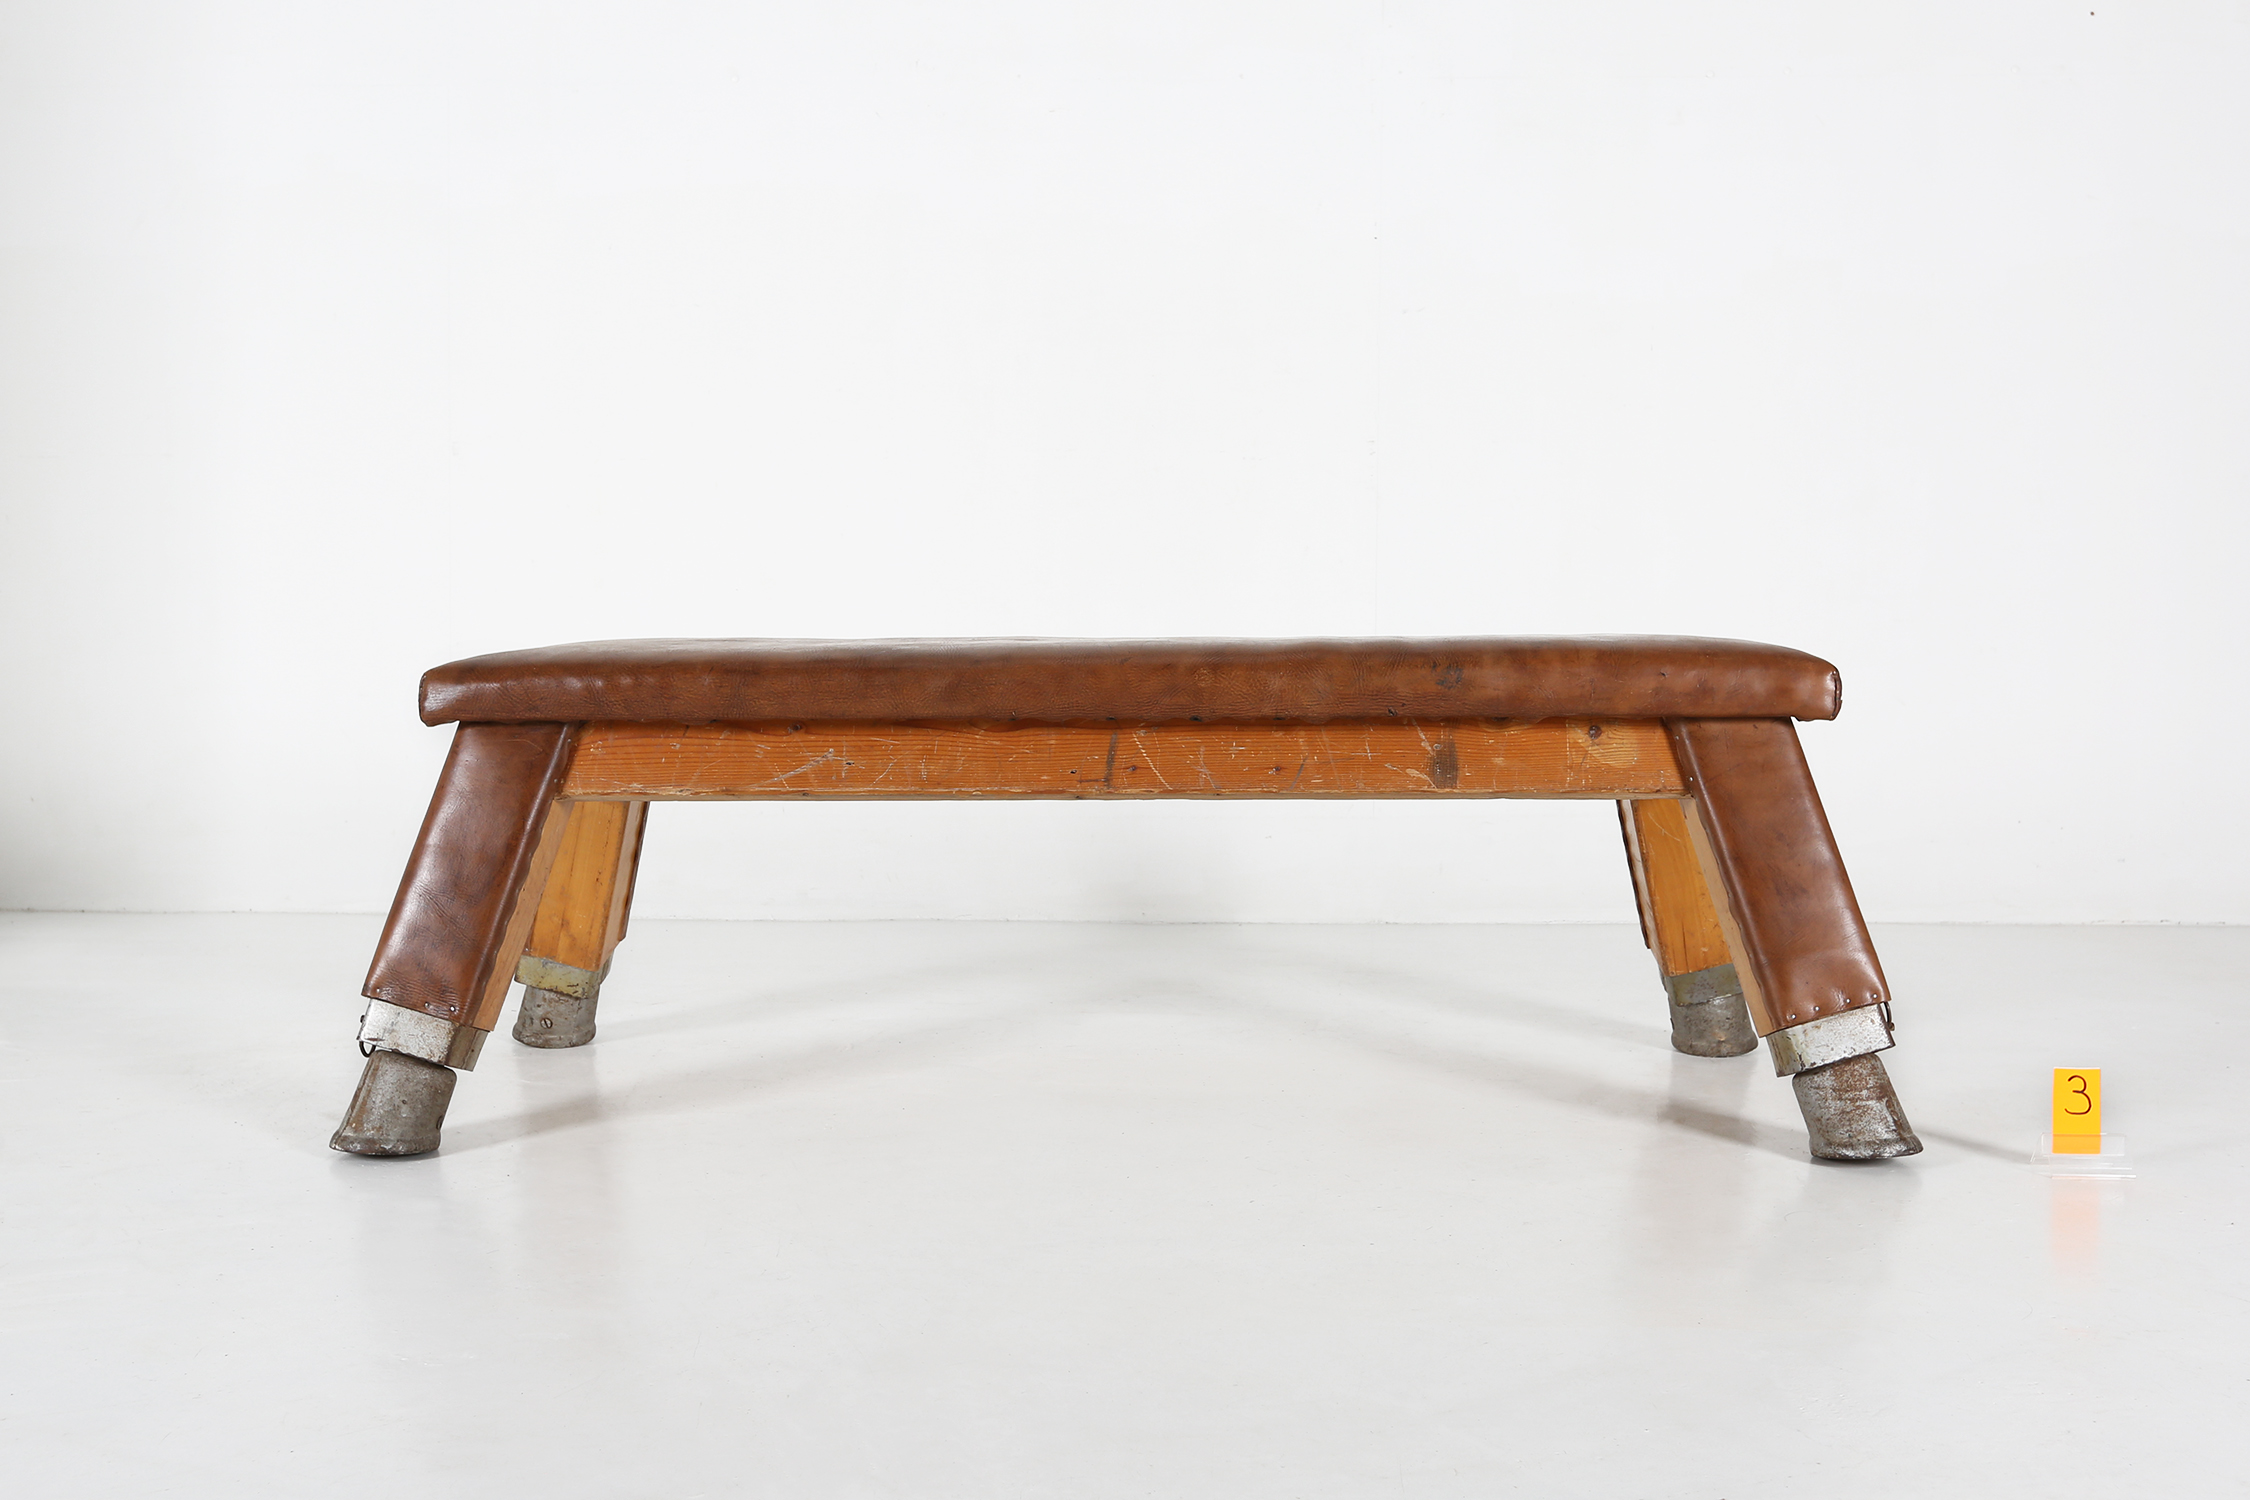  industrial leather gym bench, Belgium, 1930sthumbnail